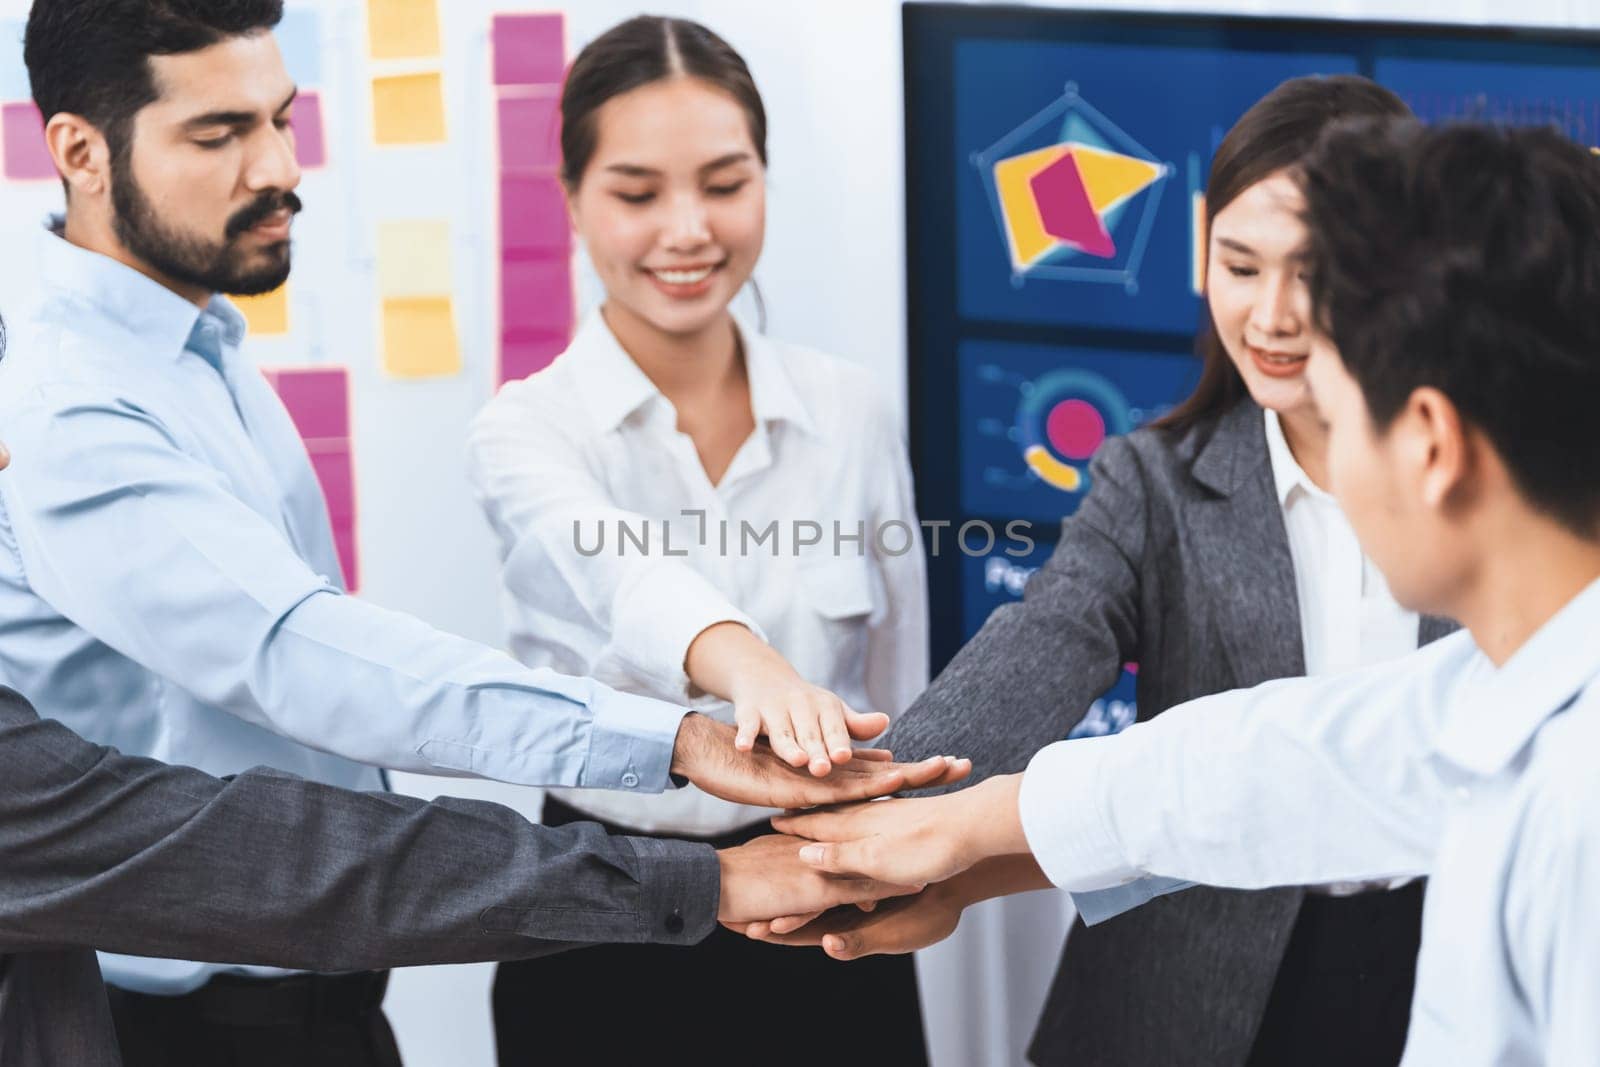 Multiracial office worker's hand stack shows solidarity, teamwork and trust in diverse community. Businesspeople unite for business success through synergy and collaboration by hand stacking. Concord